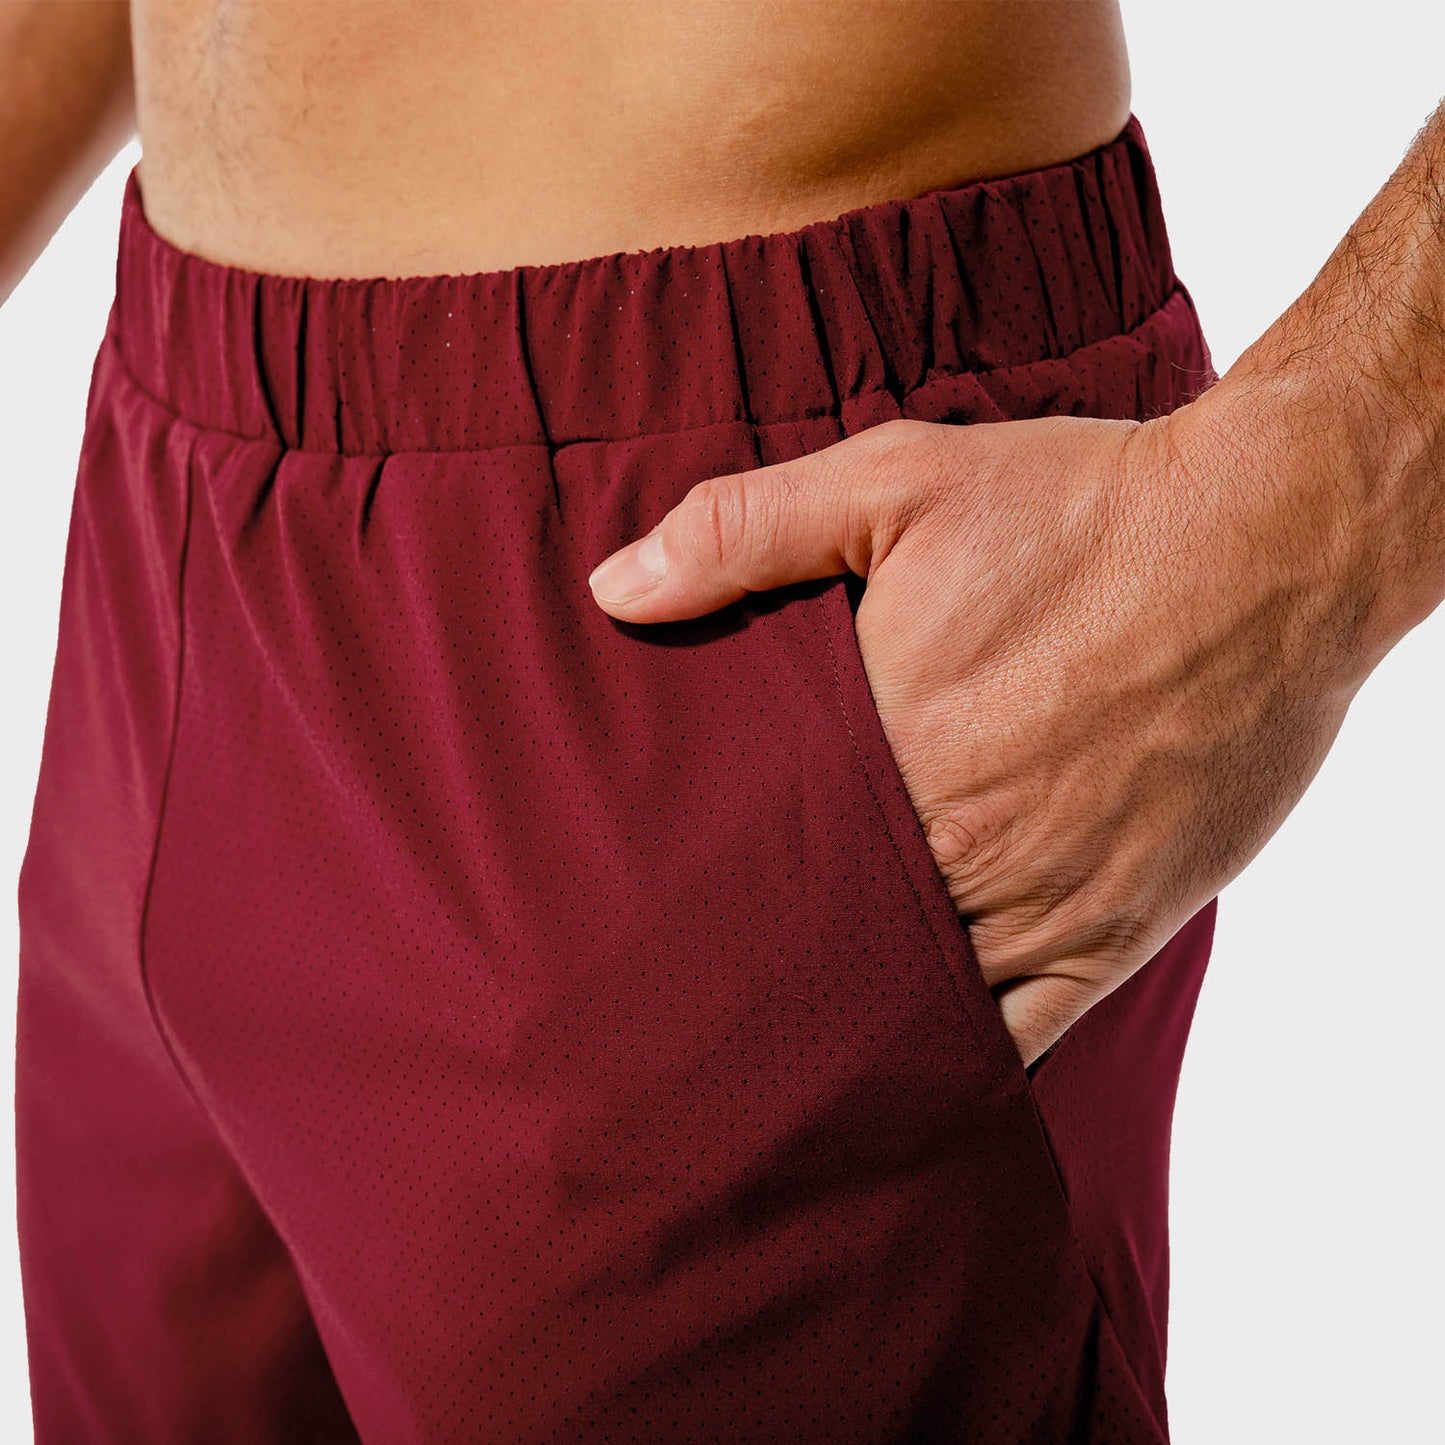 squatwolf-gym-wear-2-in-1-dry-tech-shorts-maroon-workout-shorts-for-men